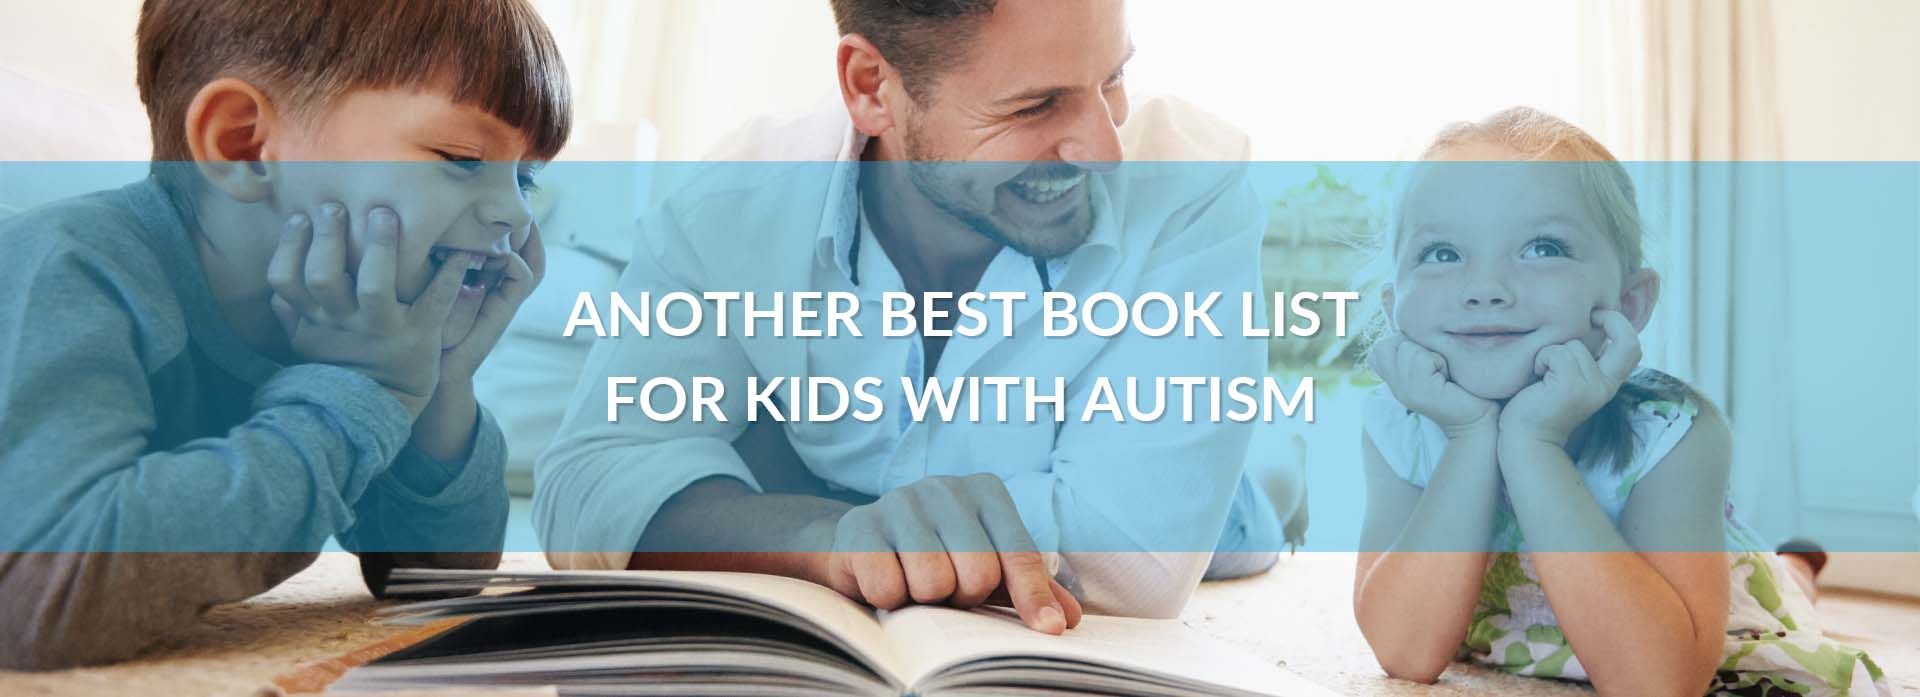 book list for kids with autism, autism, special needs